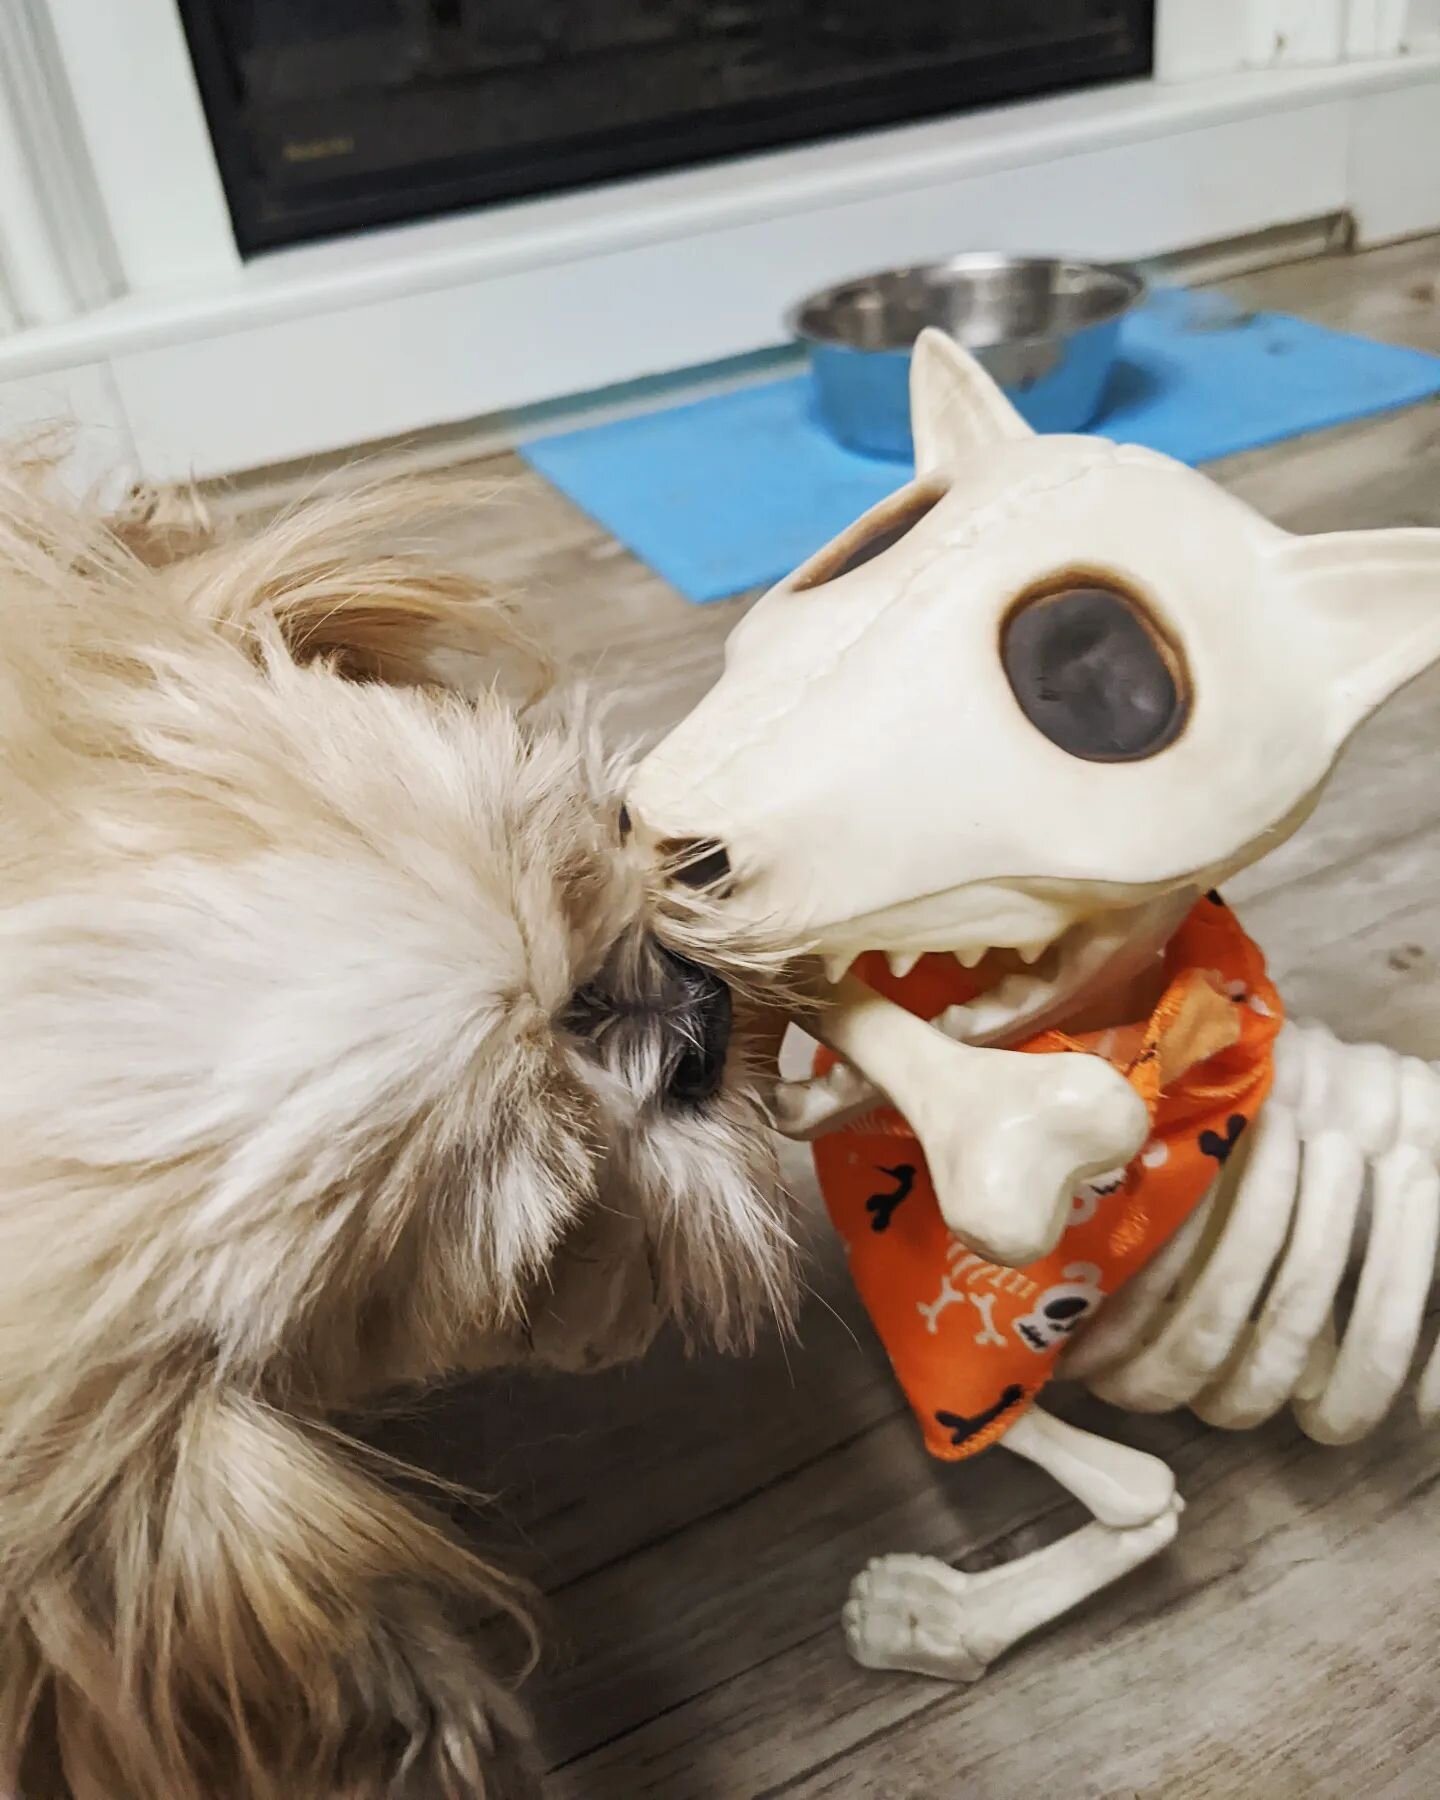 Spooktober Kennel Updates!

CLOSED FOR THE HOLIDAY
The kennel will be closed to the public Monday, October 10, for Thanksgiving. Minimal staff will be on hand to take care of the pups and will not be answering phones, emails, etc. The groomers will b